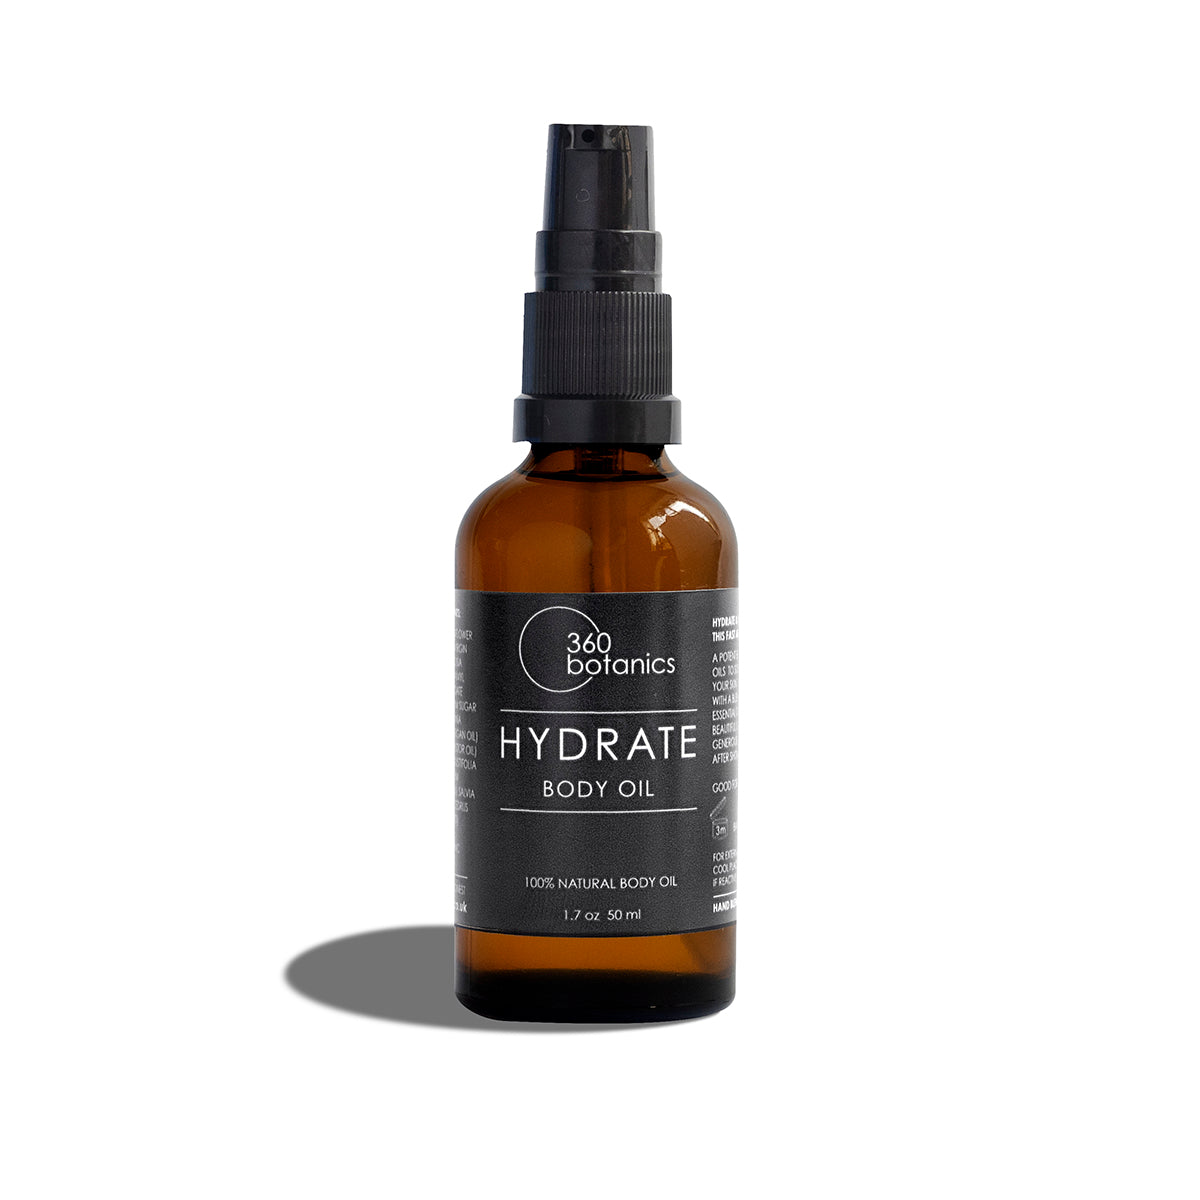  A 360 Botanics HYDRATE Body Oil bottle with a black label, made of amber glass with a spray nozzle, against a white background with a soft shadow to the right.